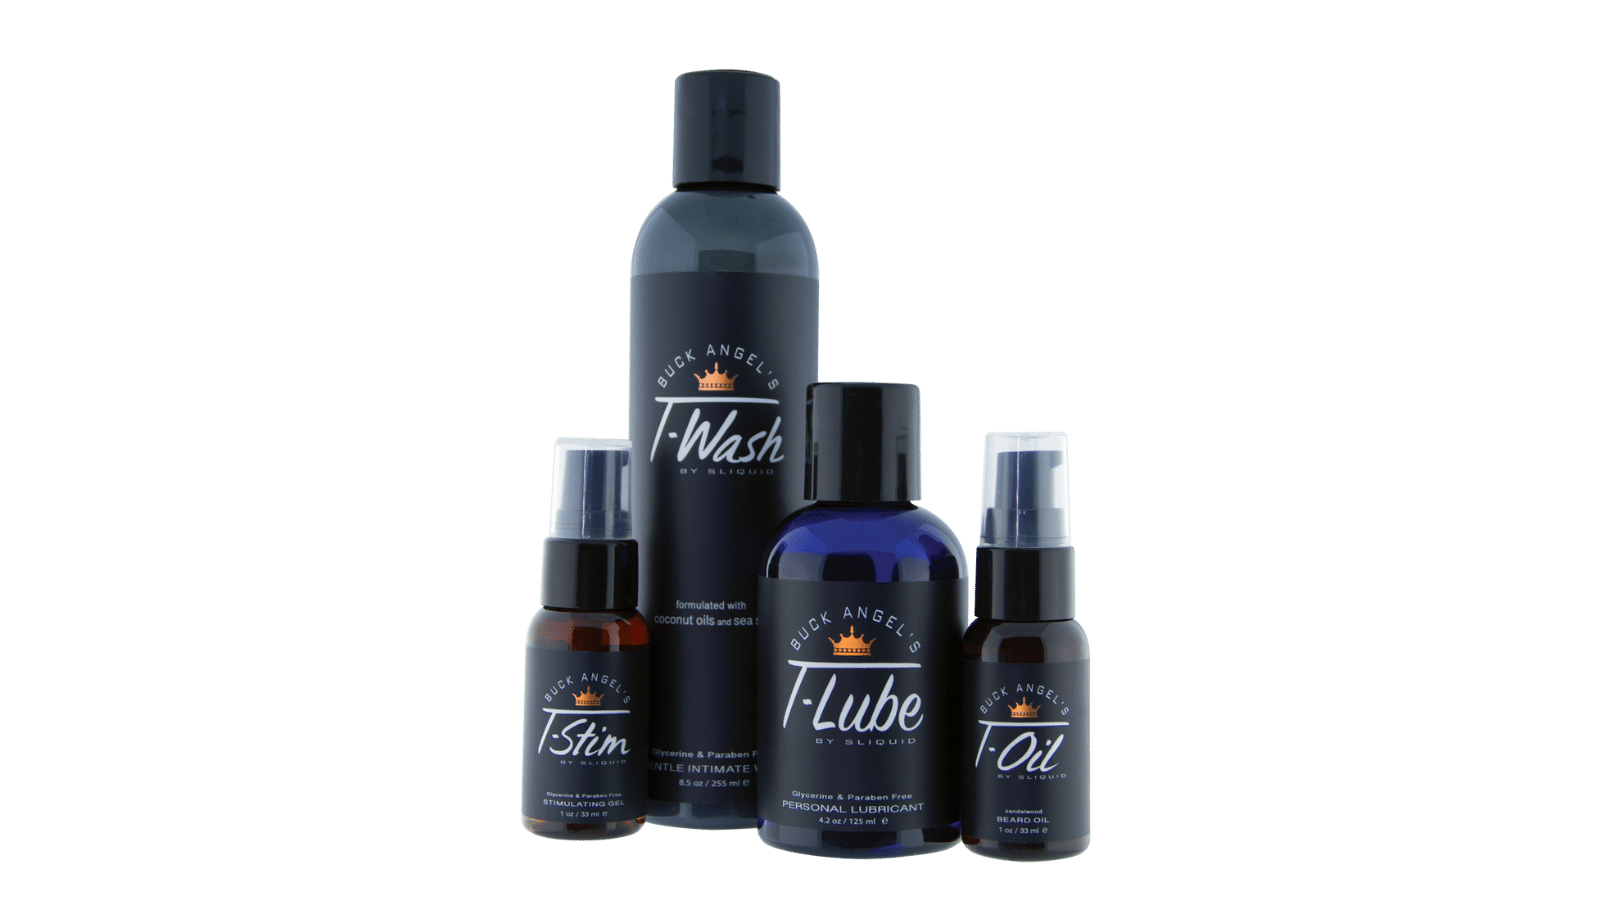 Buck Angel's T-Wash - Sliquid Natural Intimate Products